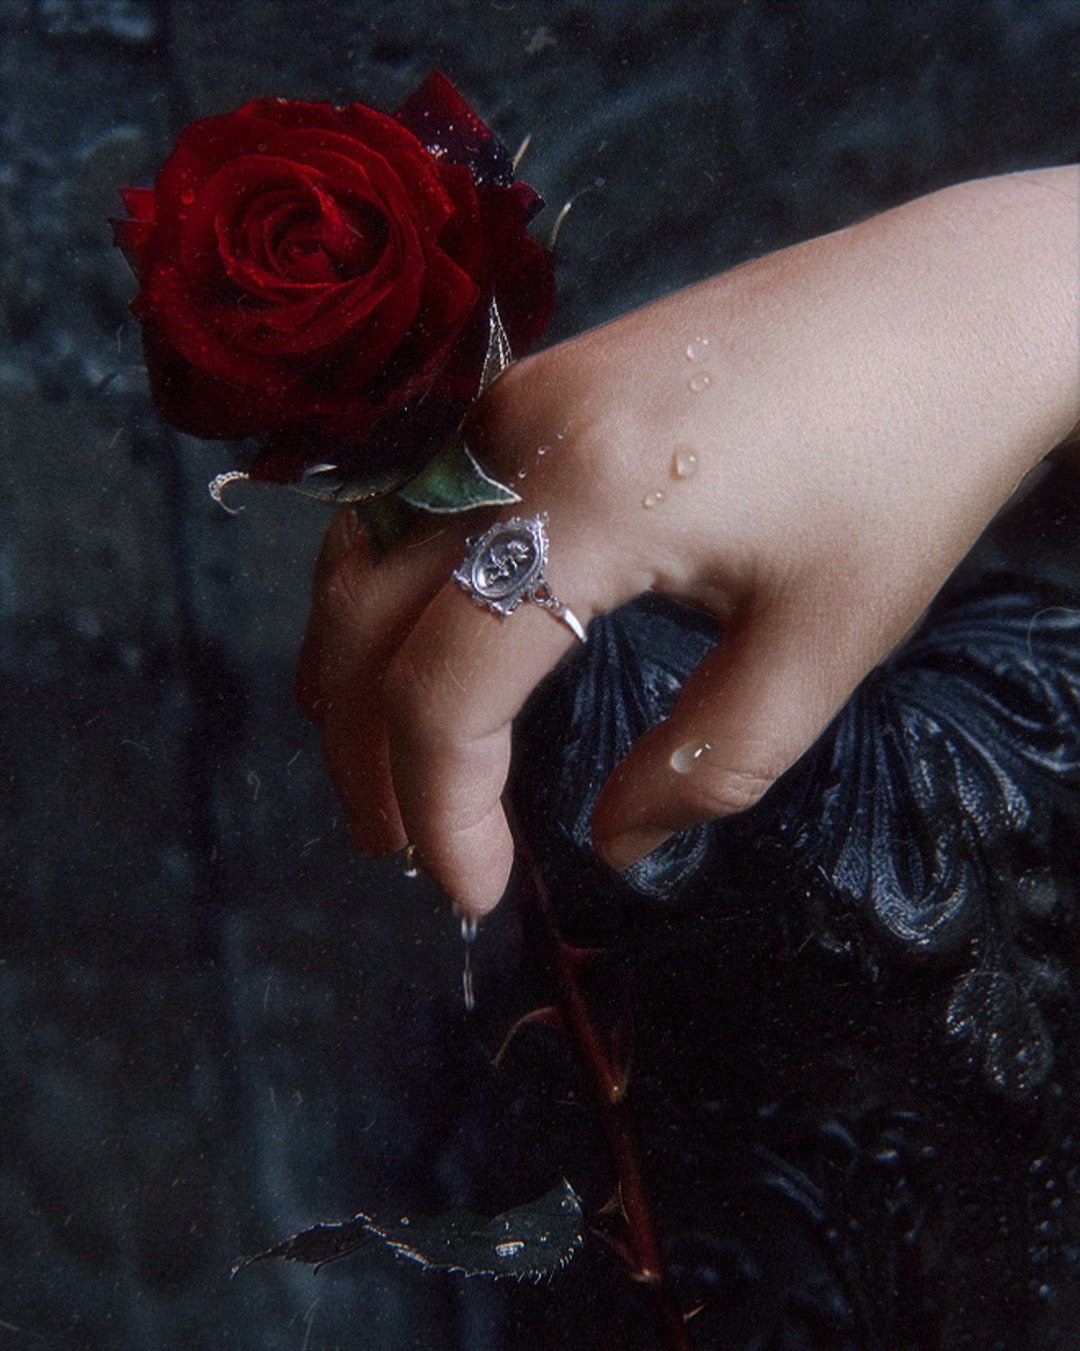 PRE-ORDER: The "Lenore's Tomb” Curio Ring